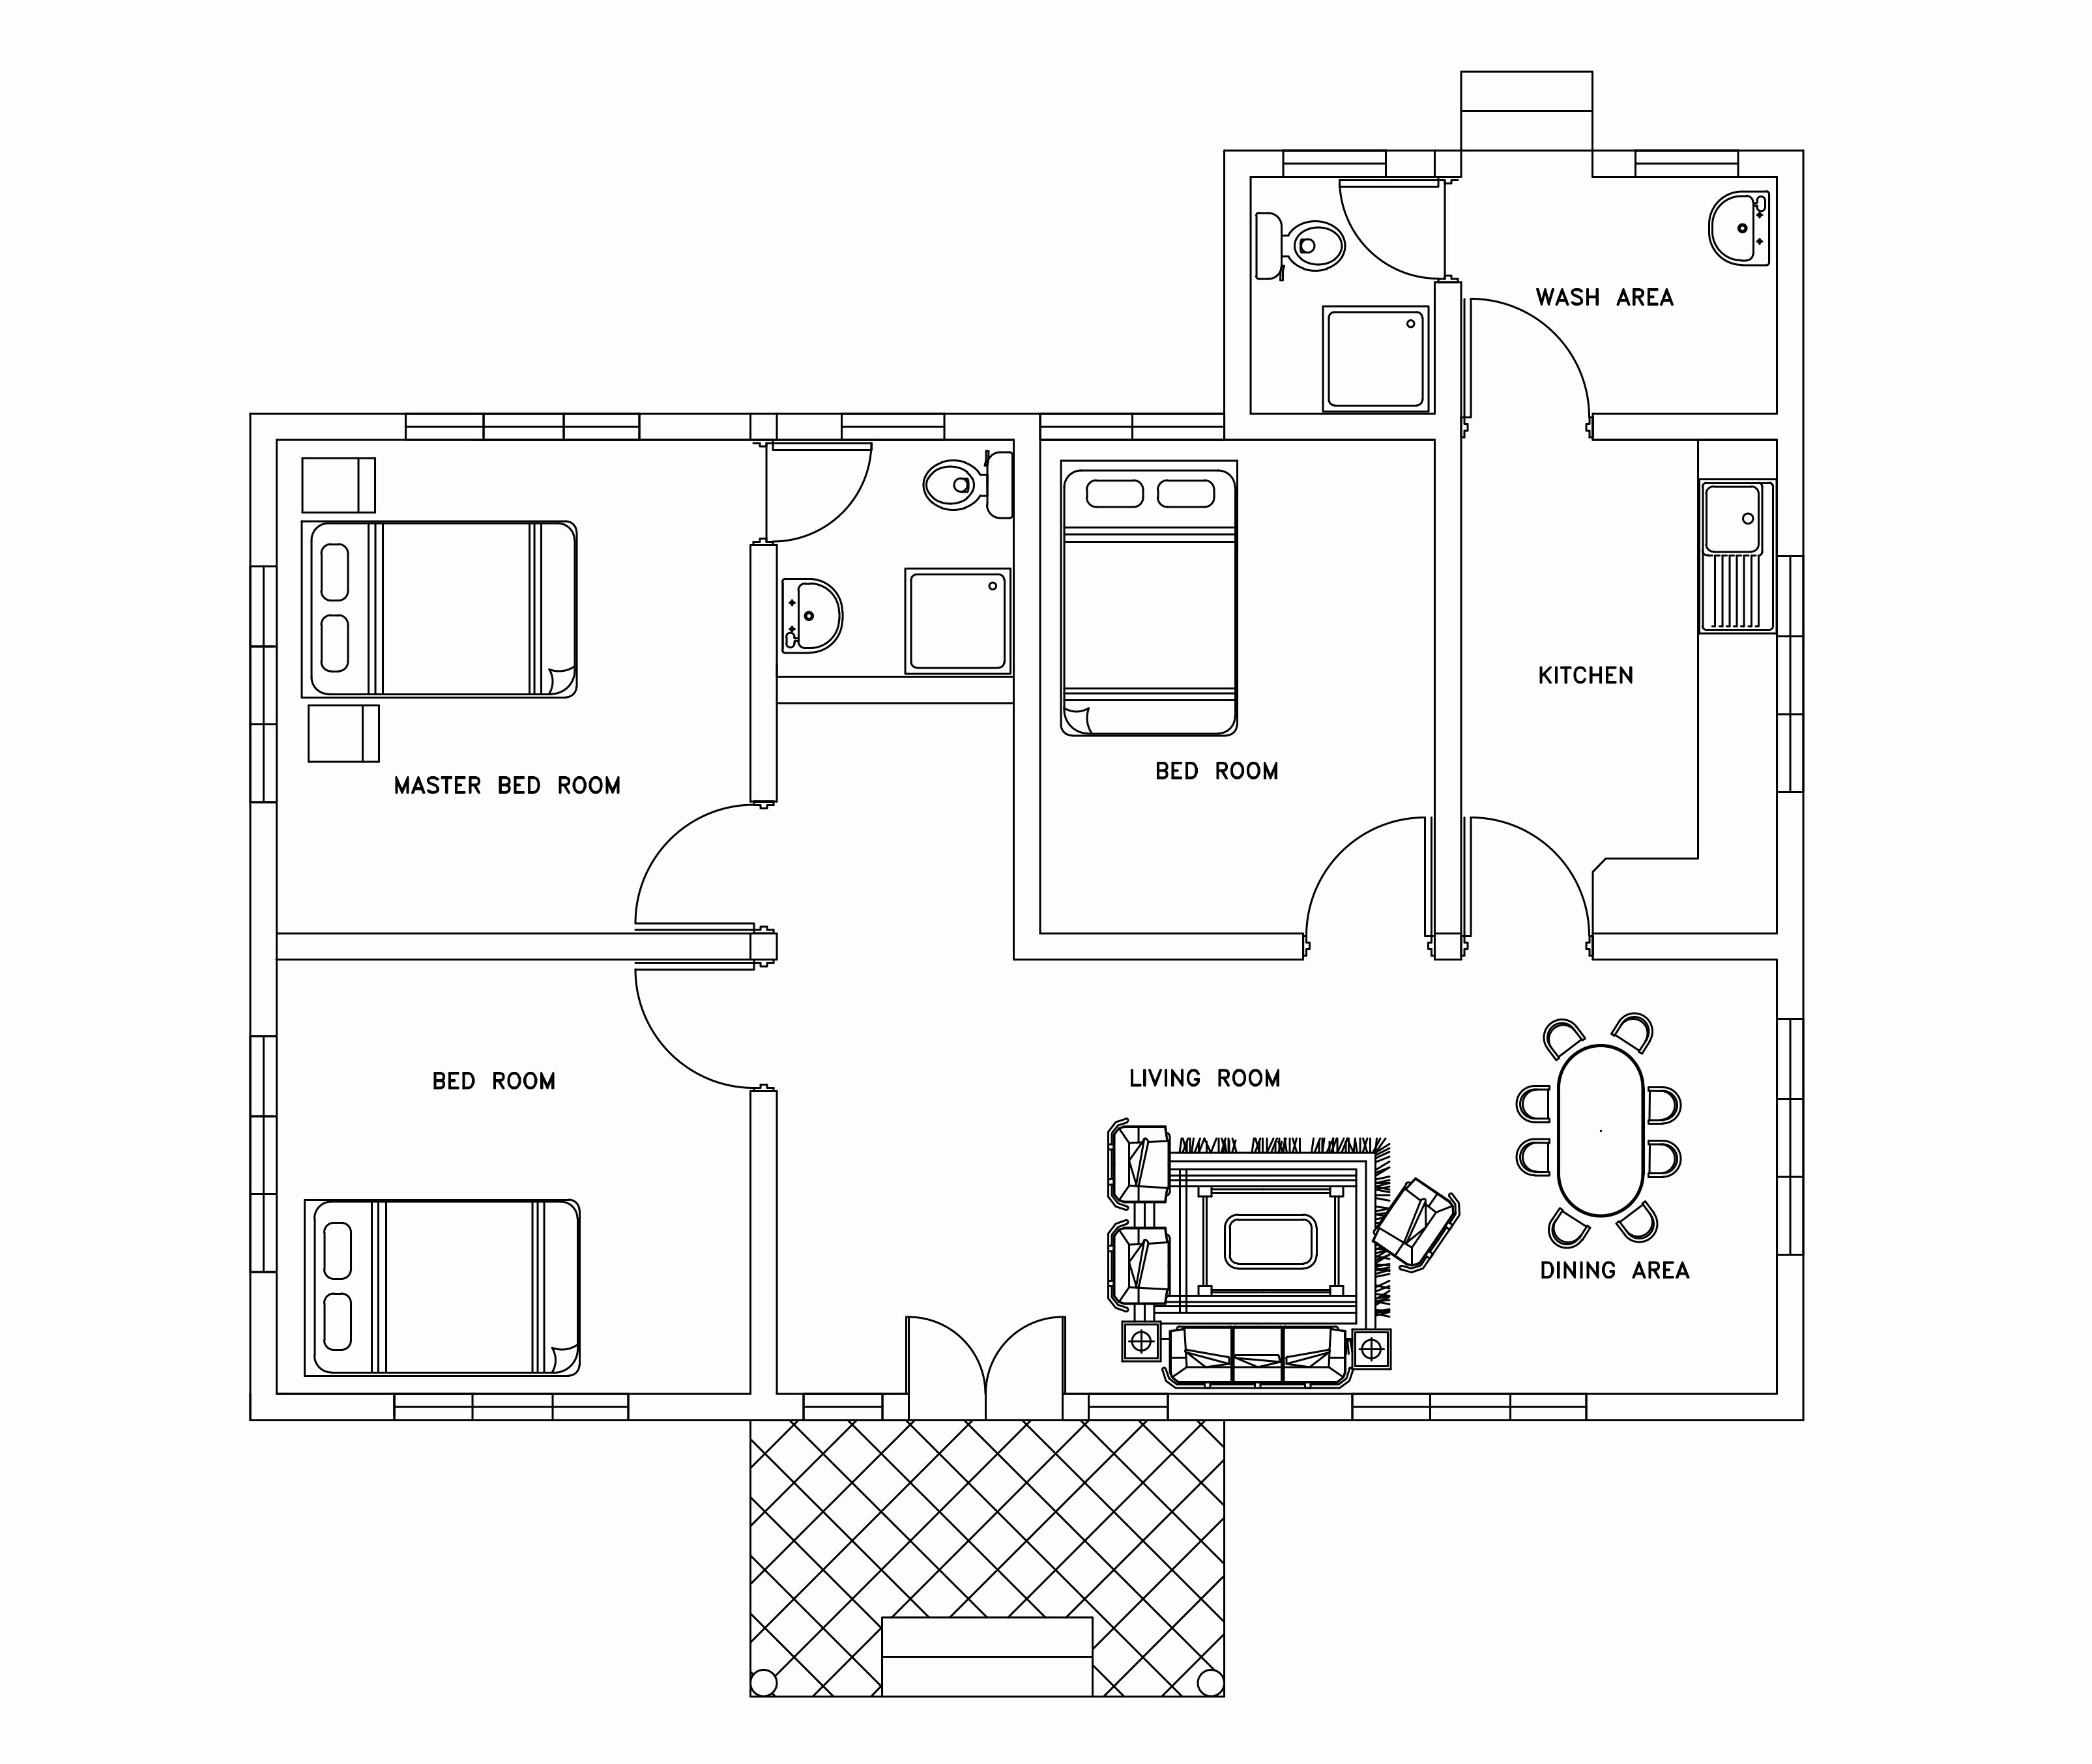 Autocad Floor Plan Template Inspirational Single Story Three Bed Room Small House Plan Free